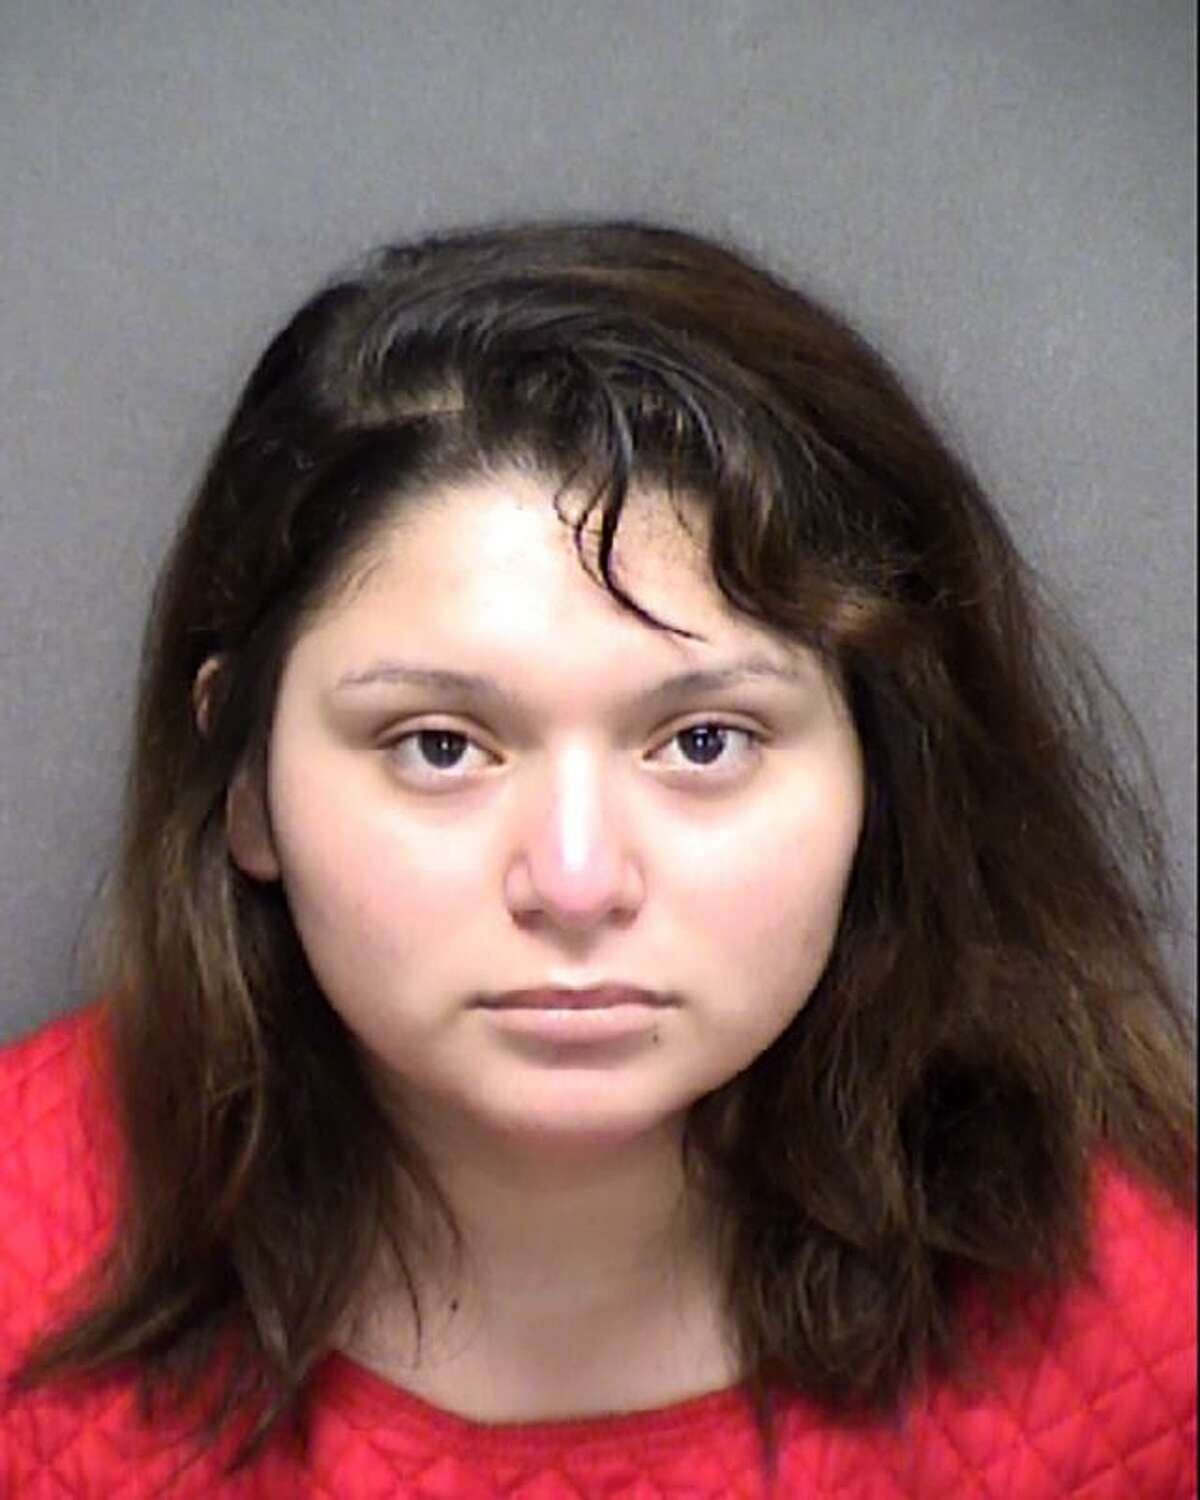 Authorities charged 20-year-old D'Lanny Reaneille Chairez with abandoning or endangering a child. She had been missing with her 18-month old son since January.